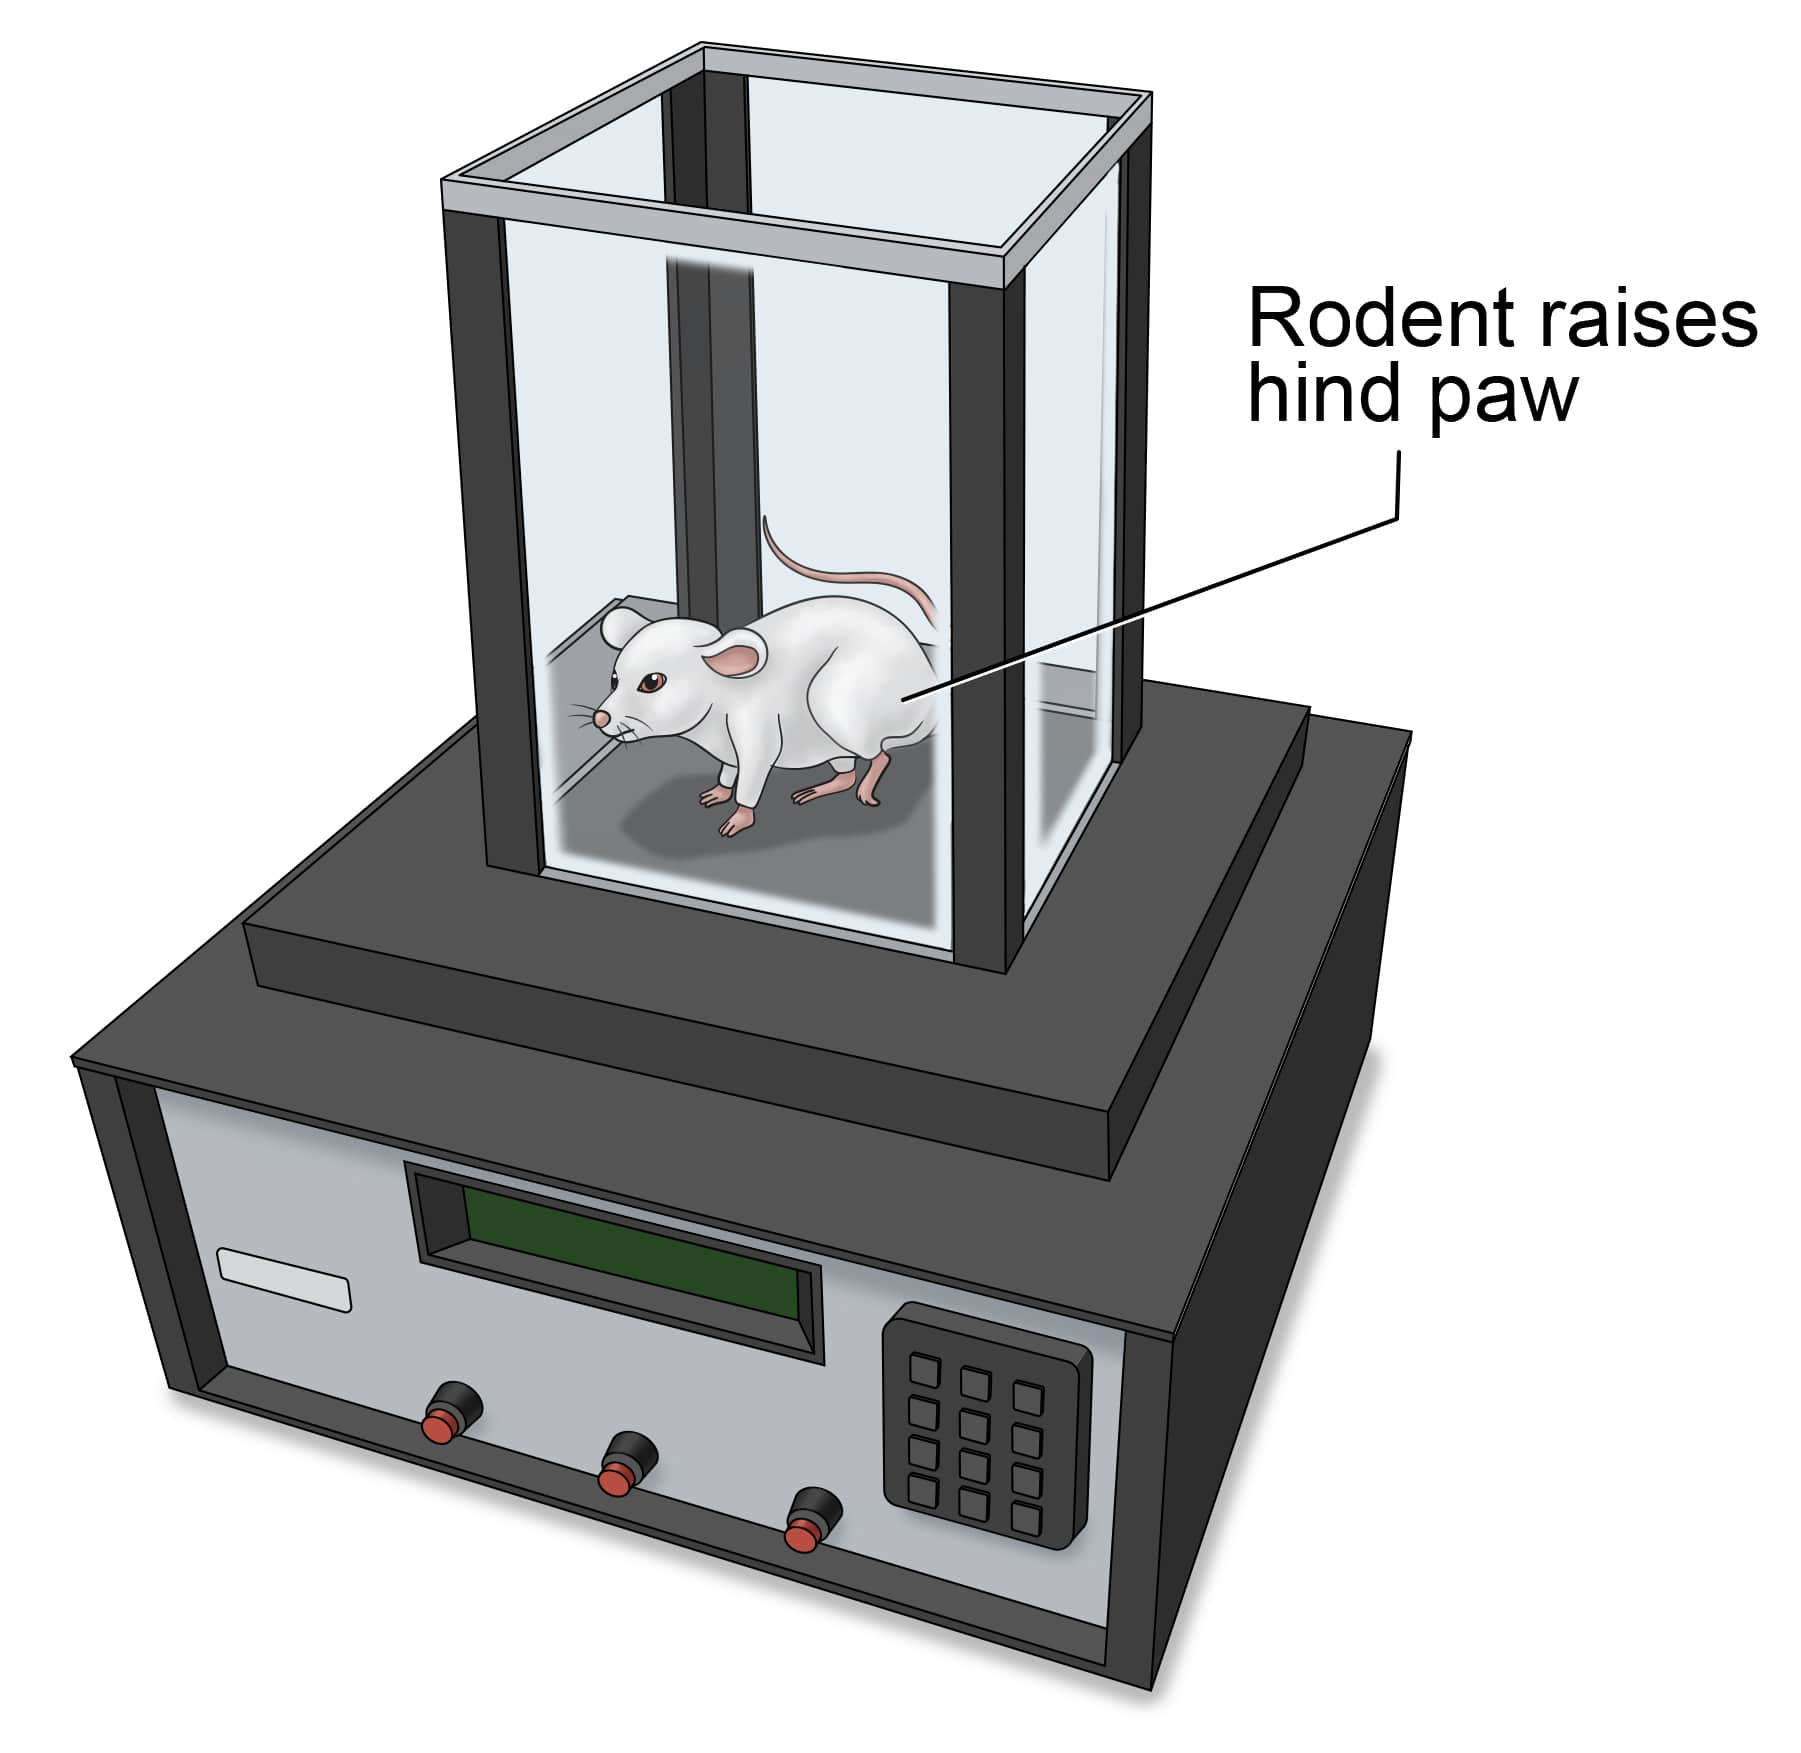 Rodent raises hind paw in the thermal sensitivity test